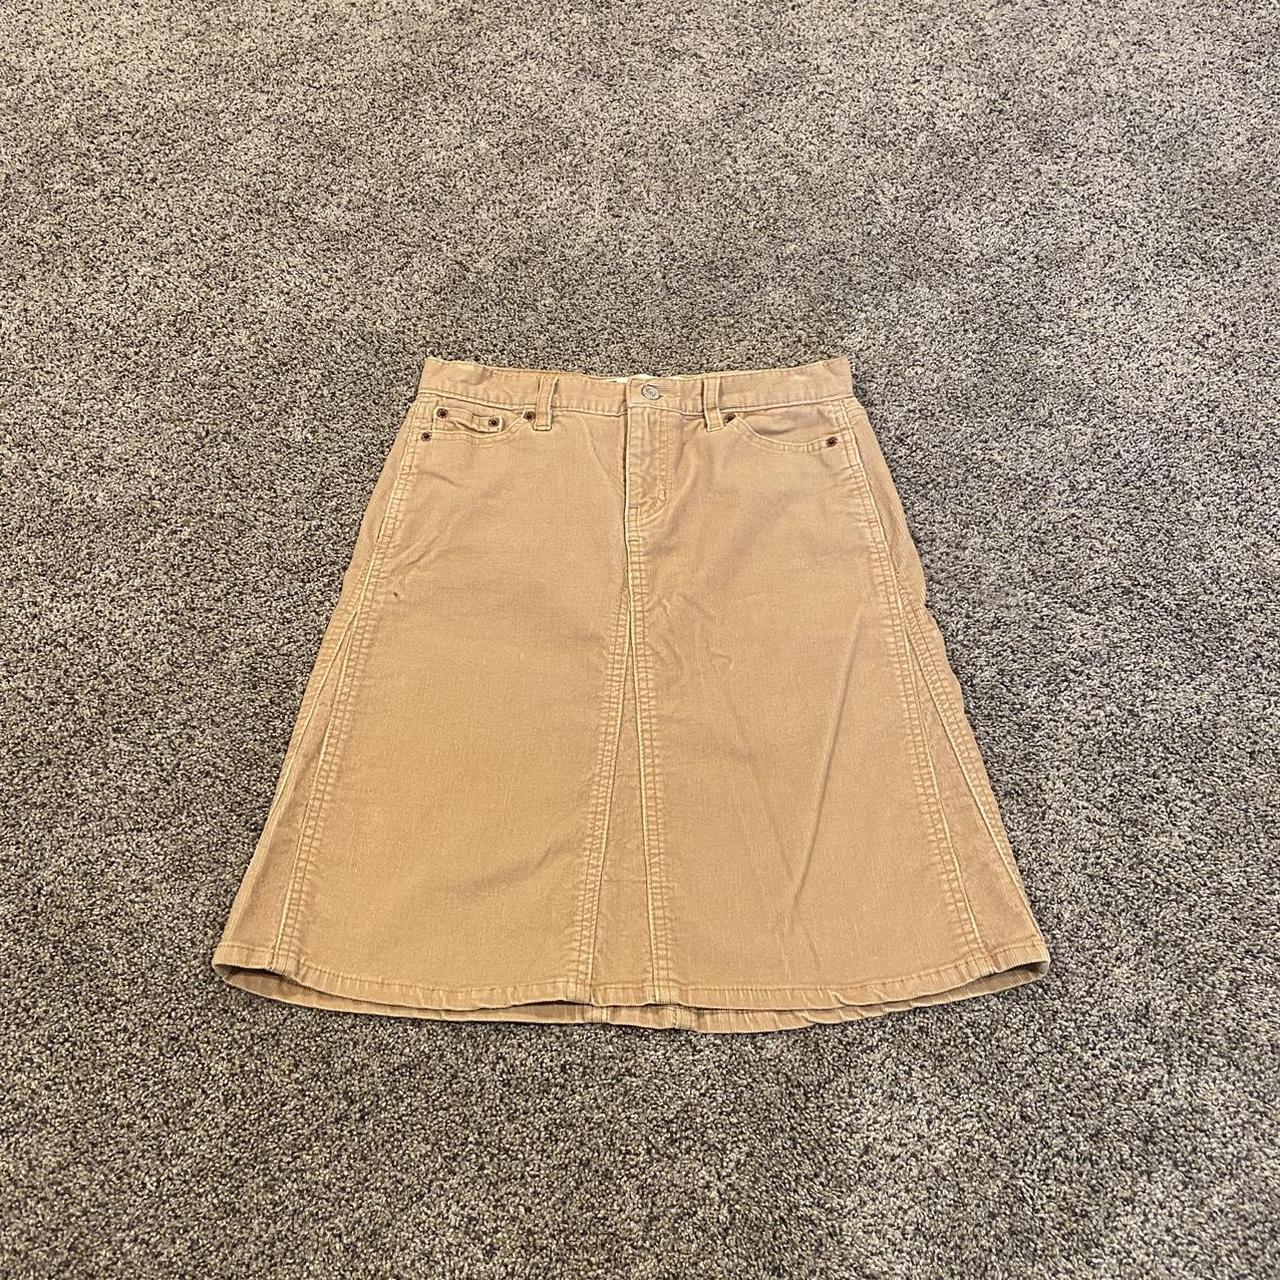 Vintage early 2000’s tan courdory low rise midi... - Depop